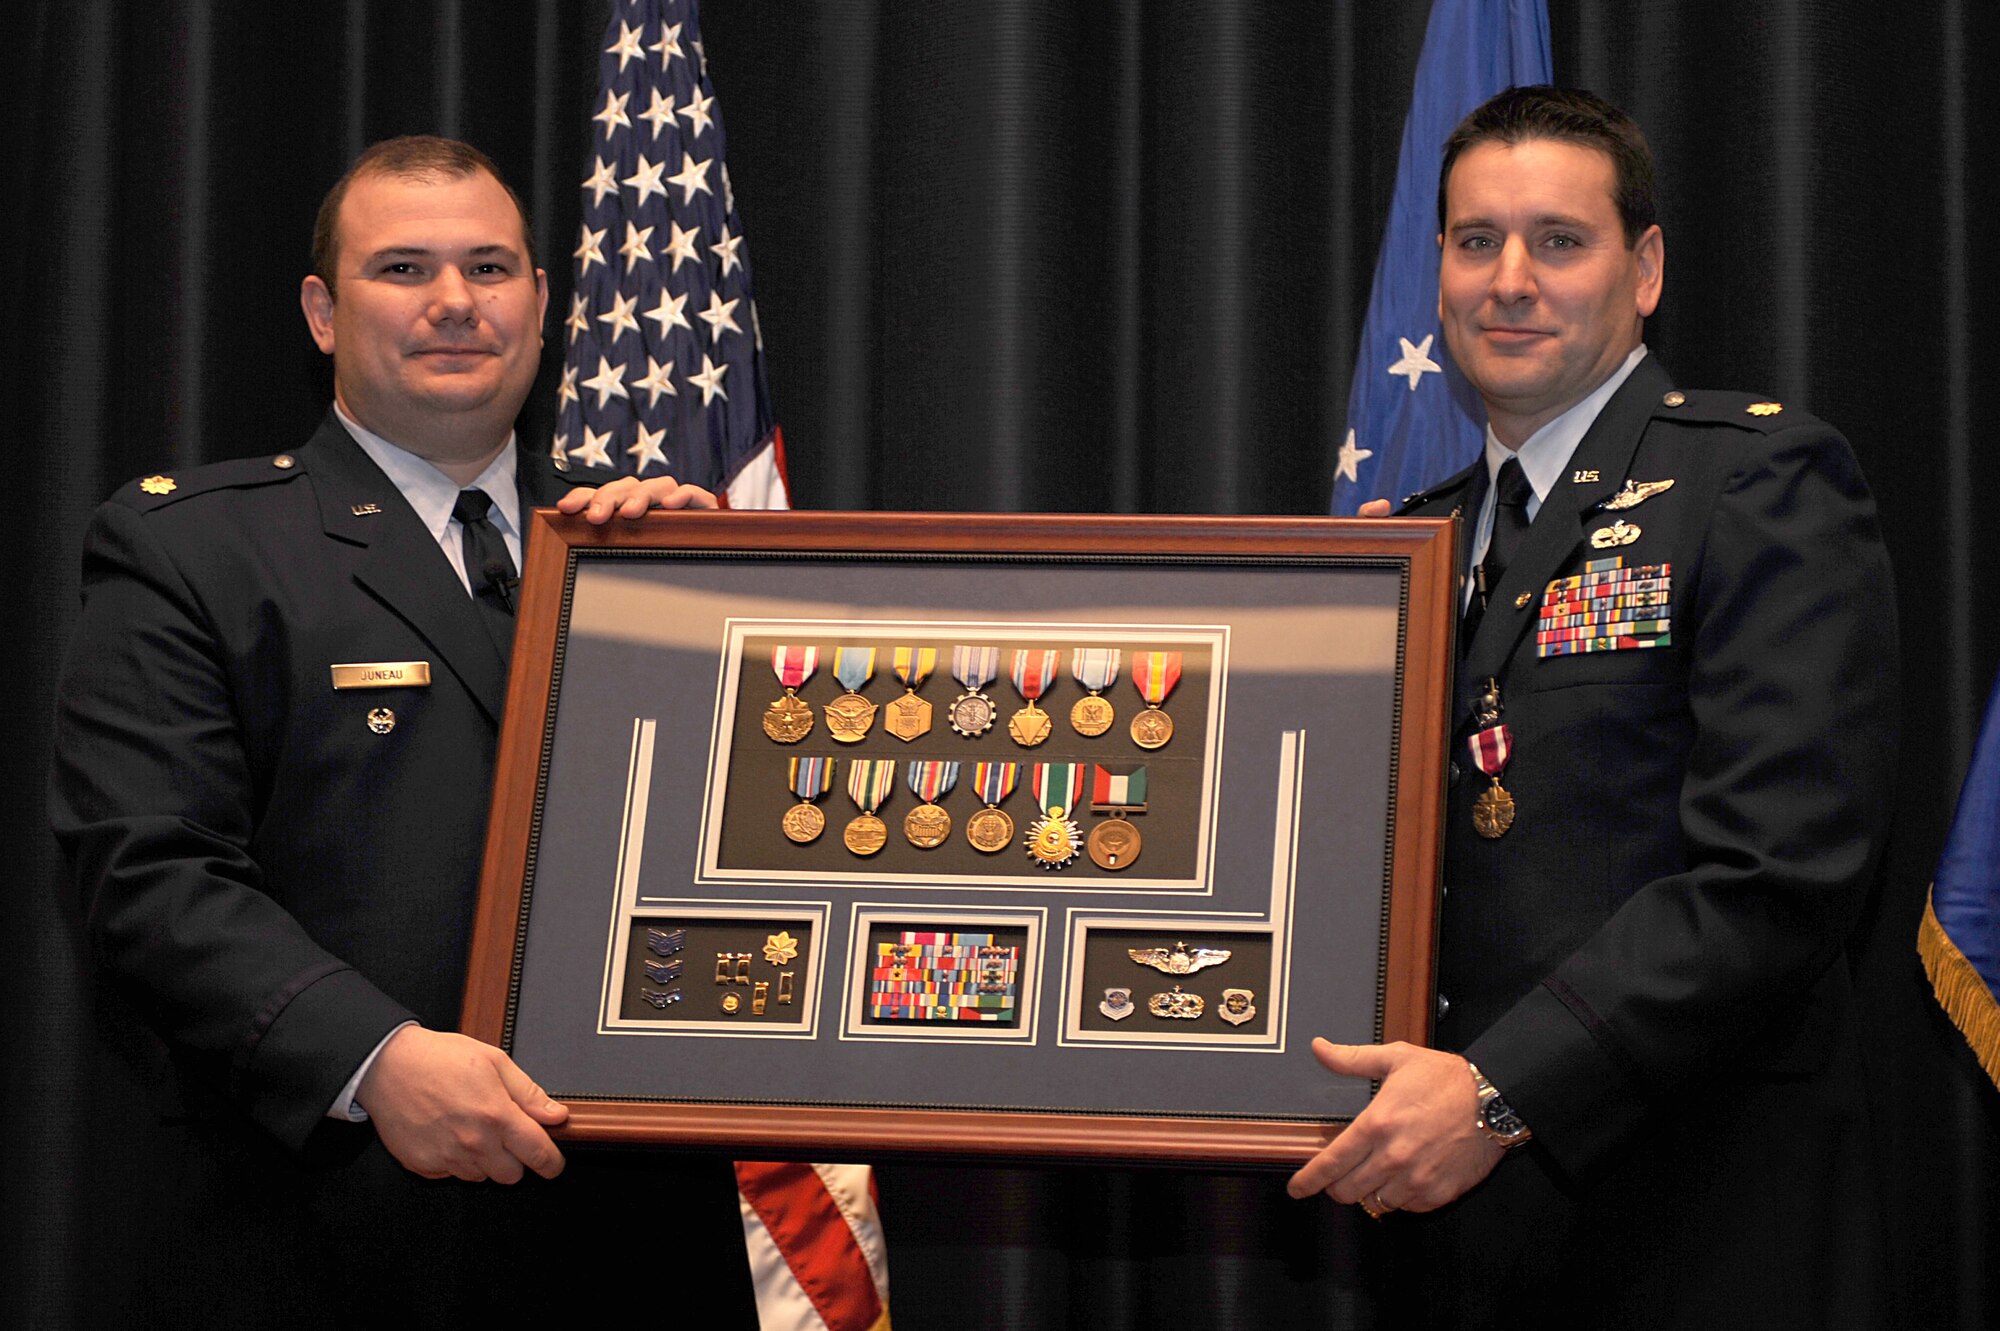 Maj. Craig Juneau, from Scott Air Force Base, Ill., presents a shadow box to Maj. John M. Yerger during his retirement ceremony at Fort Dix, N.J., Jan. 9, 2009.  Major Yerger was the assistant chief, logistics and resources for the Expeditionary Operations School at the U.S. Air Force Expeditionary Center.  Prior to this position, Major Yerger served for four years in the Air Mobility Battlelab as a project manager and the chief of finance and program support.  Major Yerger's retirement is effective on March 1.  (U.S. Air Force Photo/Staff Sgt. Nathan Bevier)